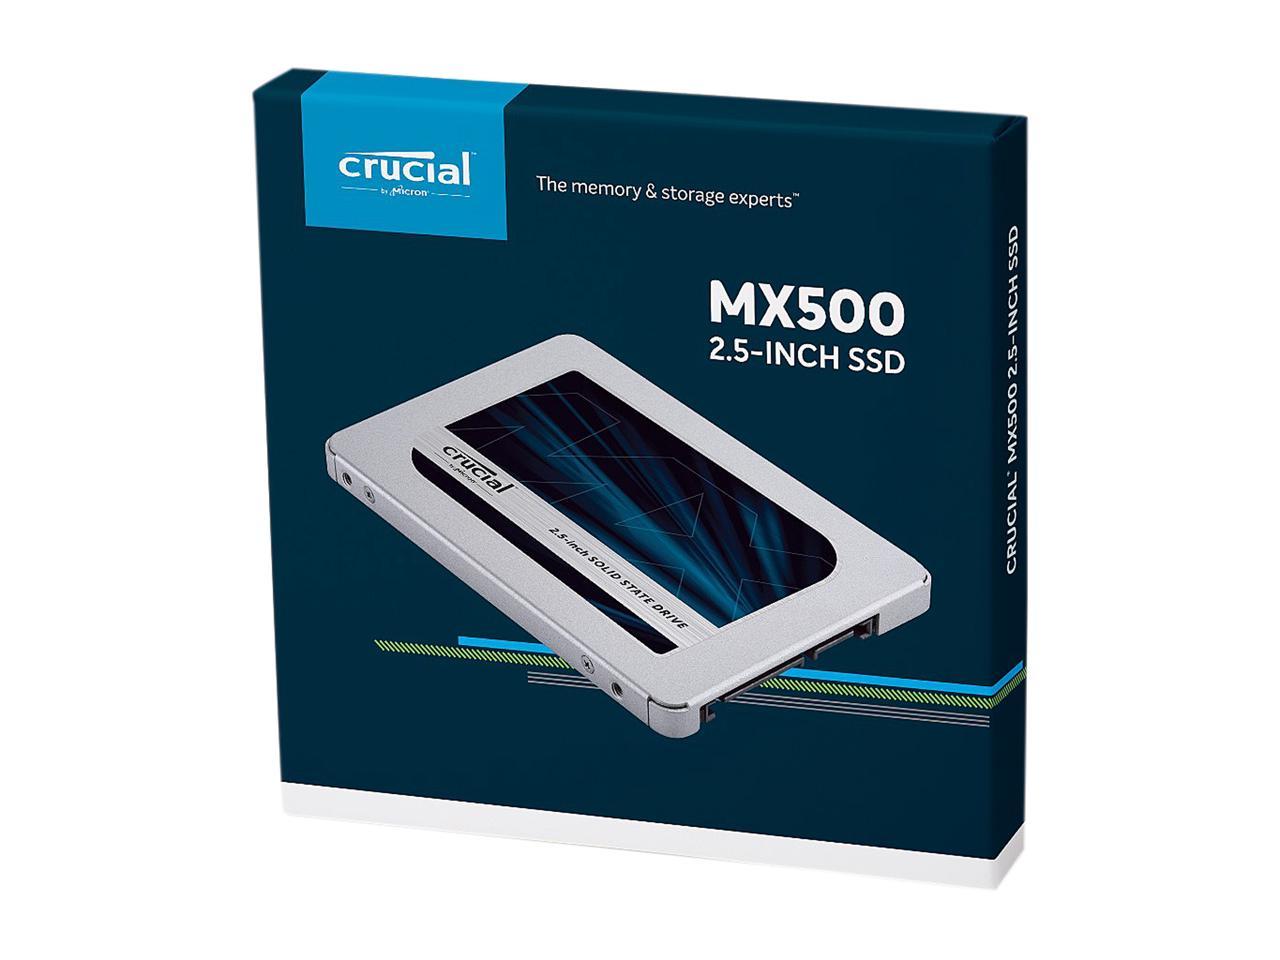 CRUCIAL CT250MX500SSD1 RT